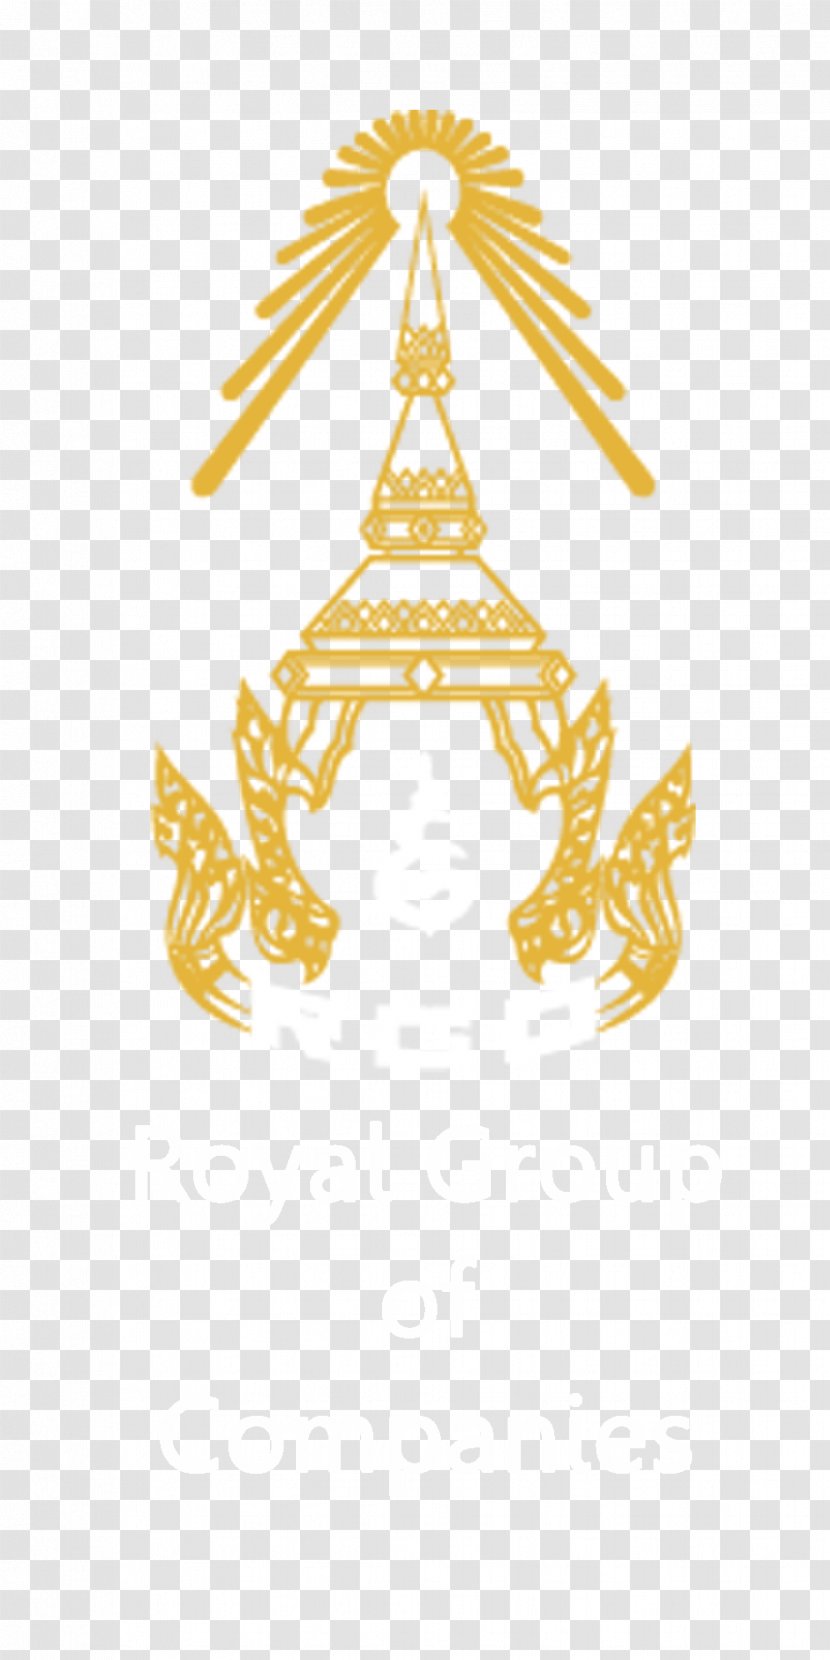 Cambodia The Royal Group Company Logo Conglomerate - Symbol Transparent PNG